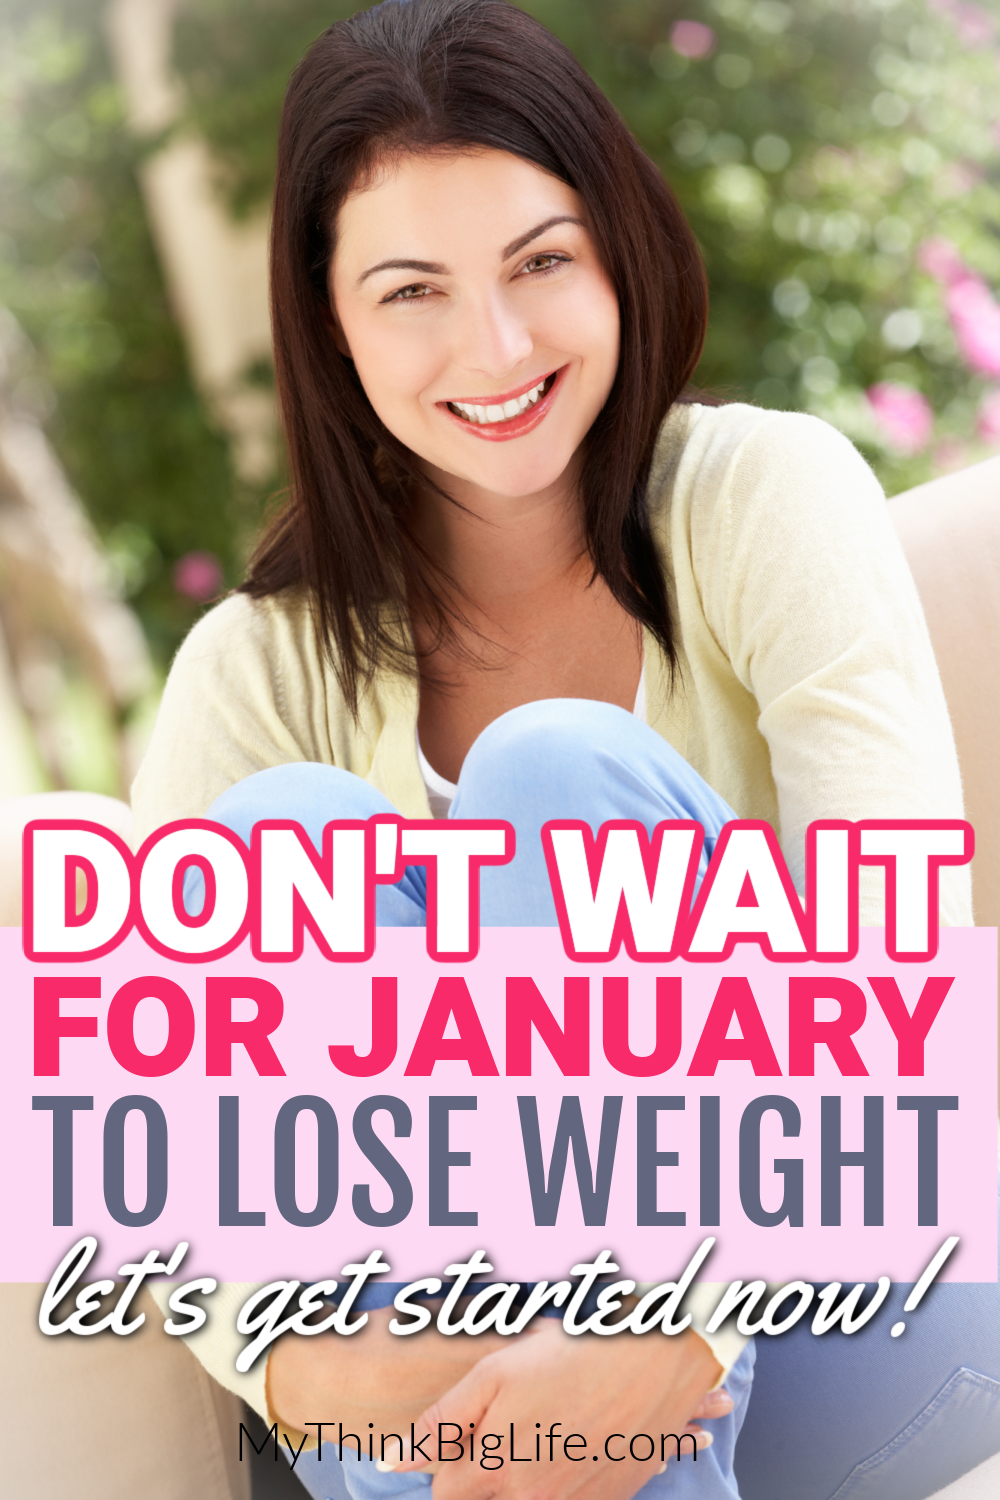 Picture of smiling woman with the words: Don't wait for January to lose weight. Let's get started now.